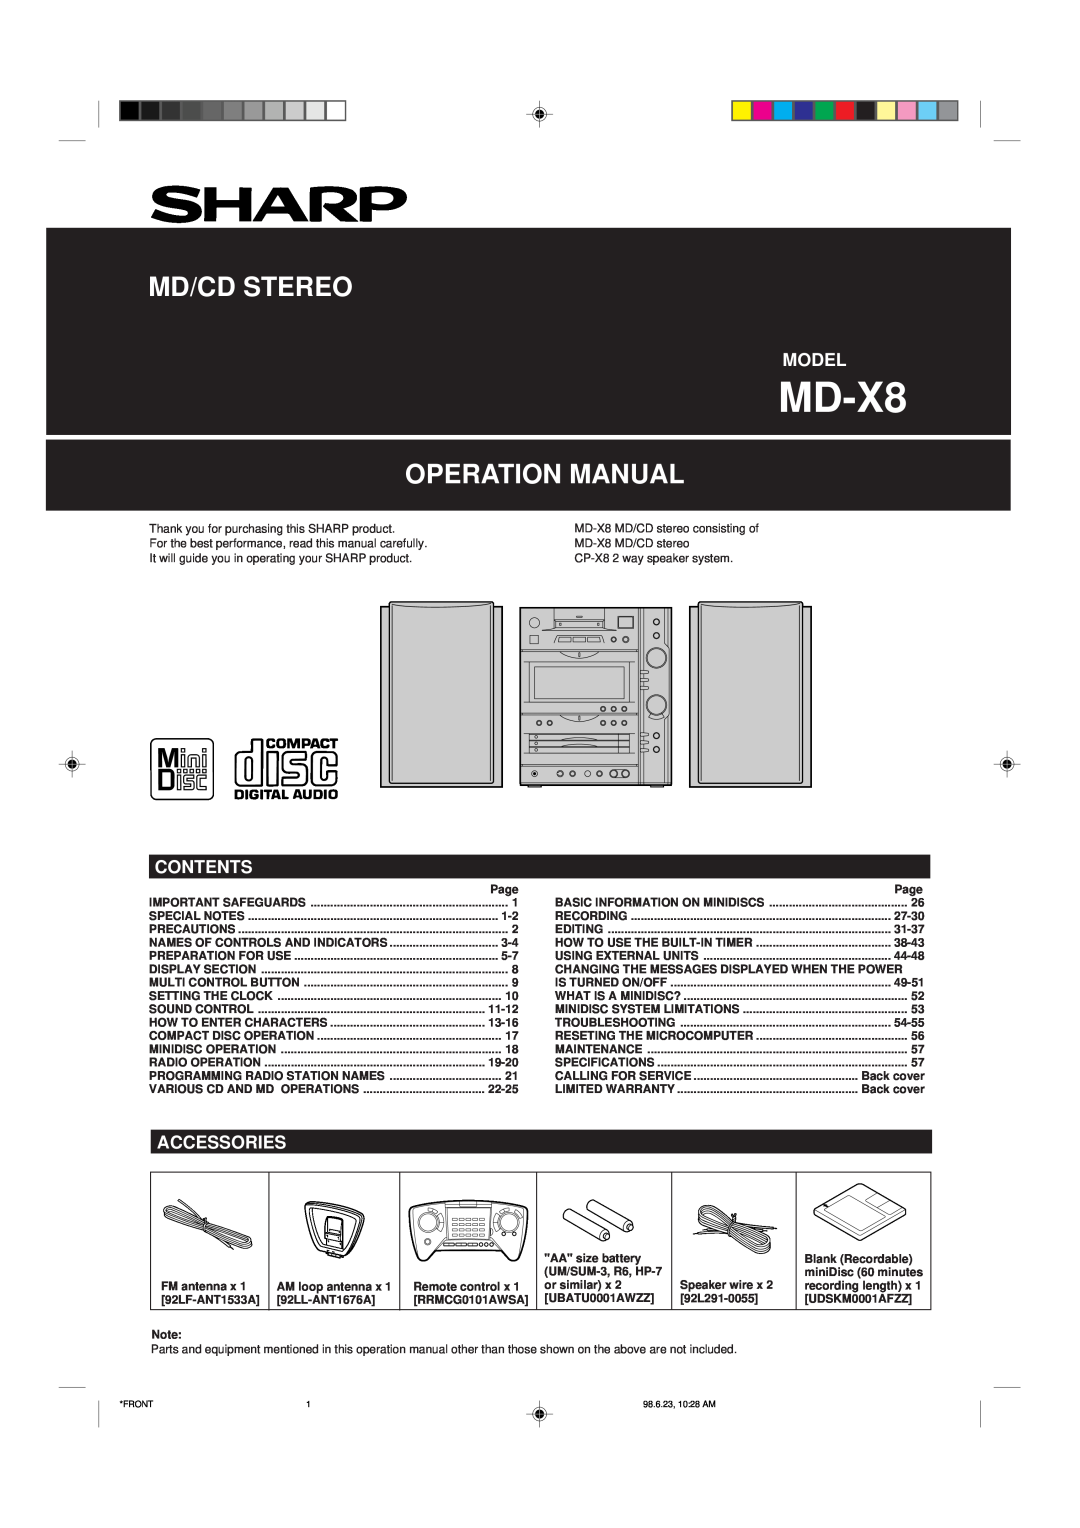 Sharp MD-X8 operation manual Md/Cd Stereo, Model, Contents, Accessories 